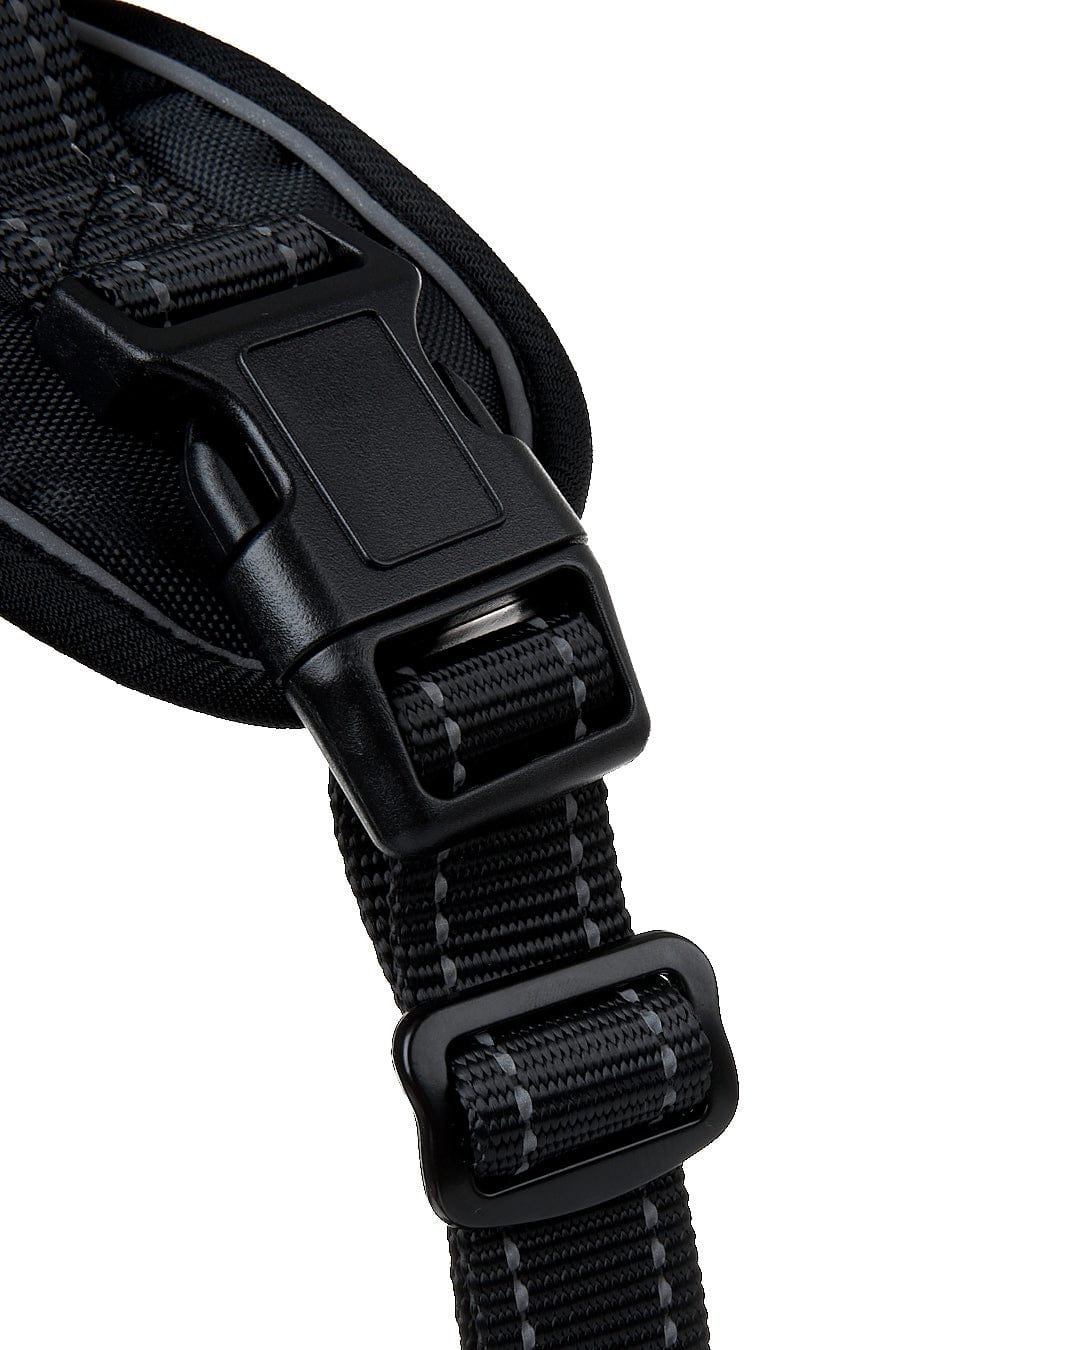 A close up of a Saltrock Pet Harness in Black with adjustable straps and a buckle.